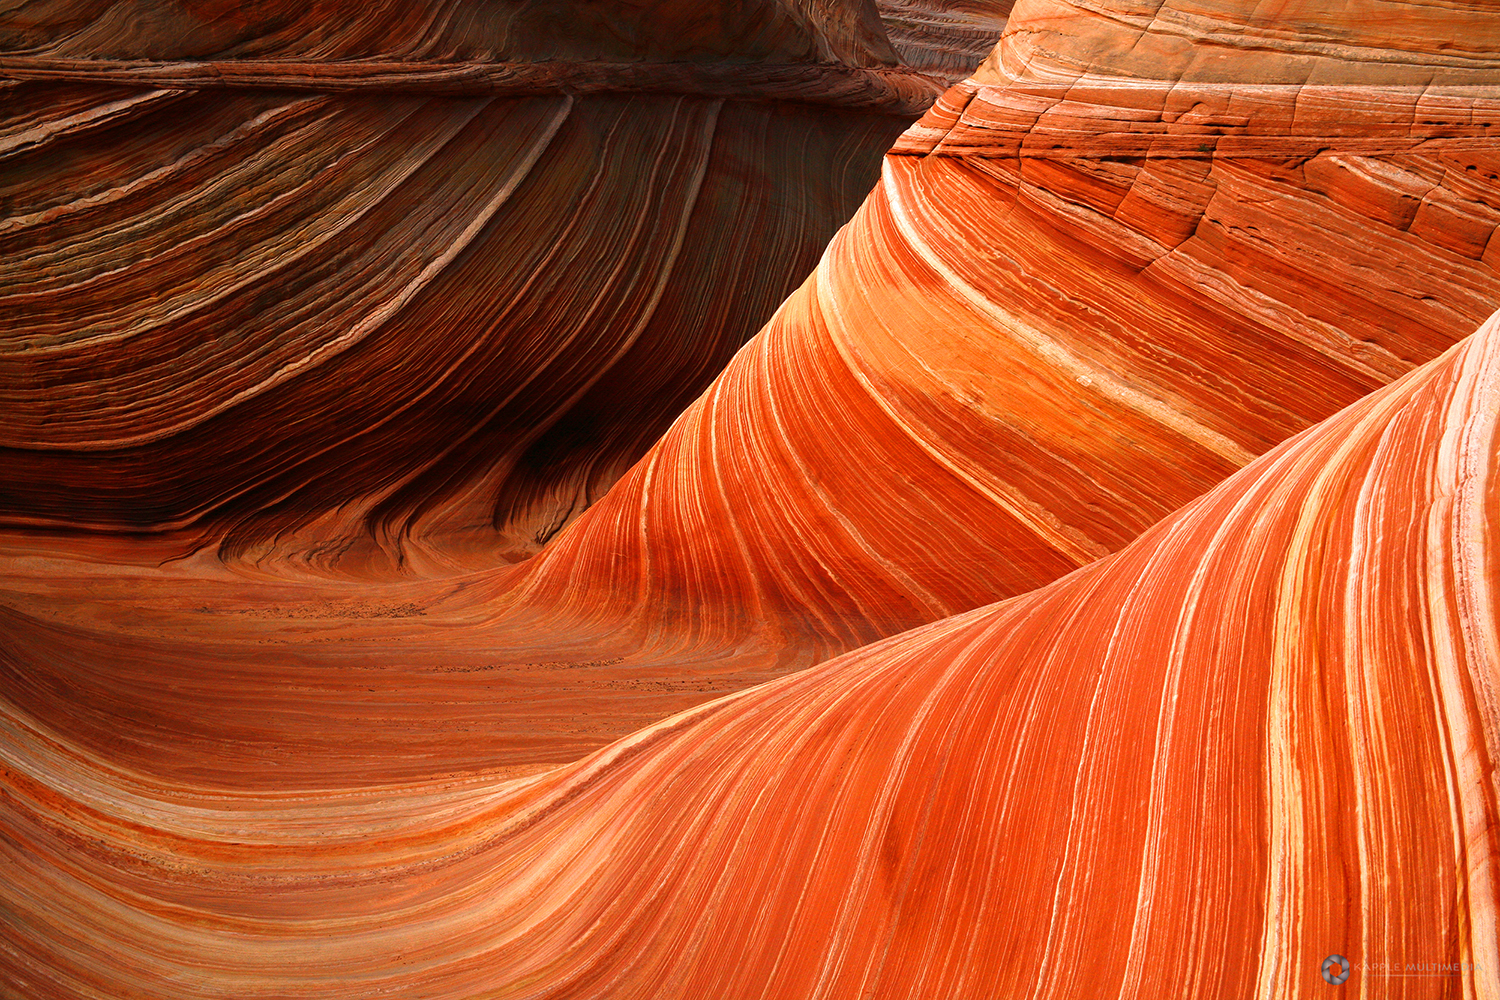 Coyote Buttes North and South